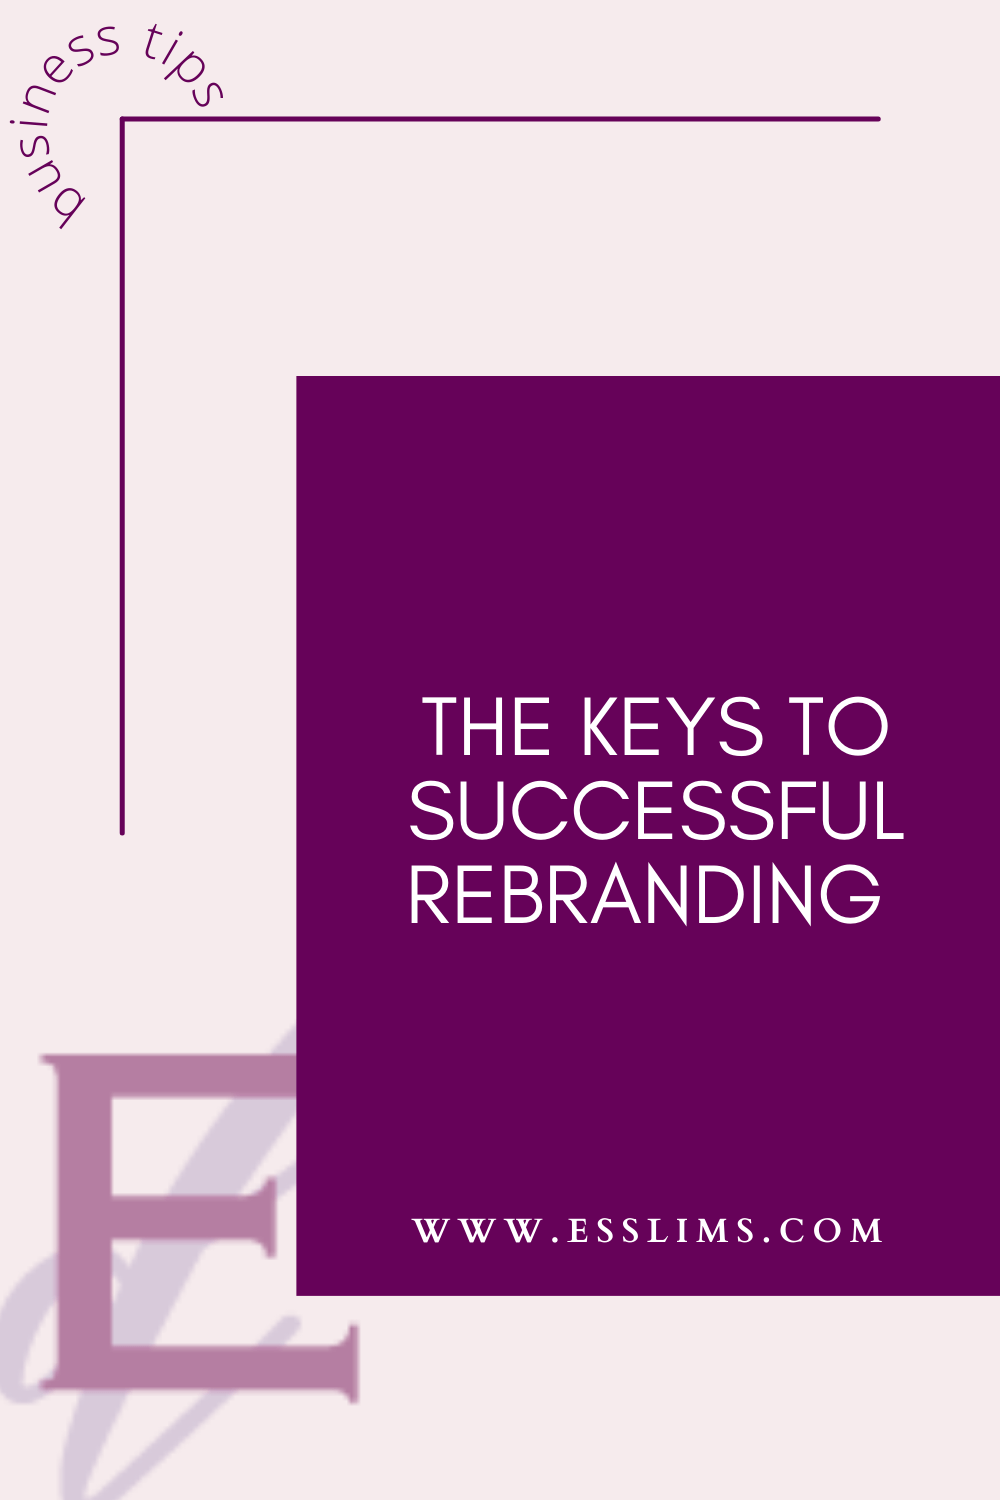 THE KEYS TO A SUCCESSFUL REBRAND